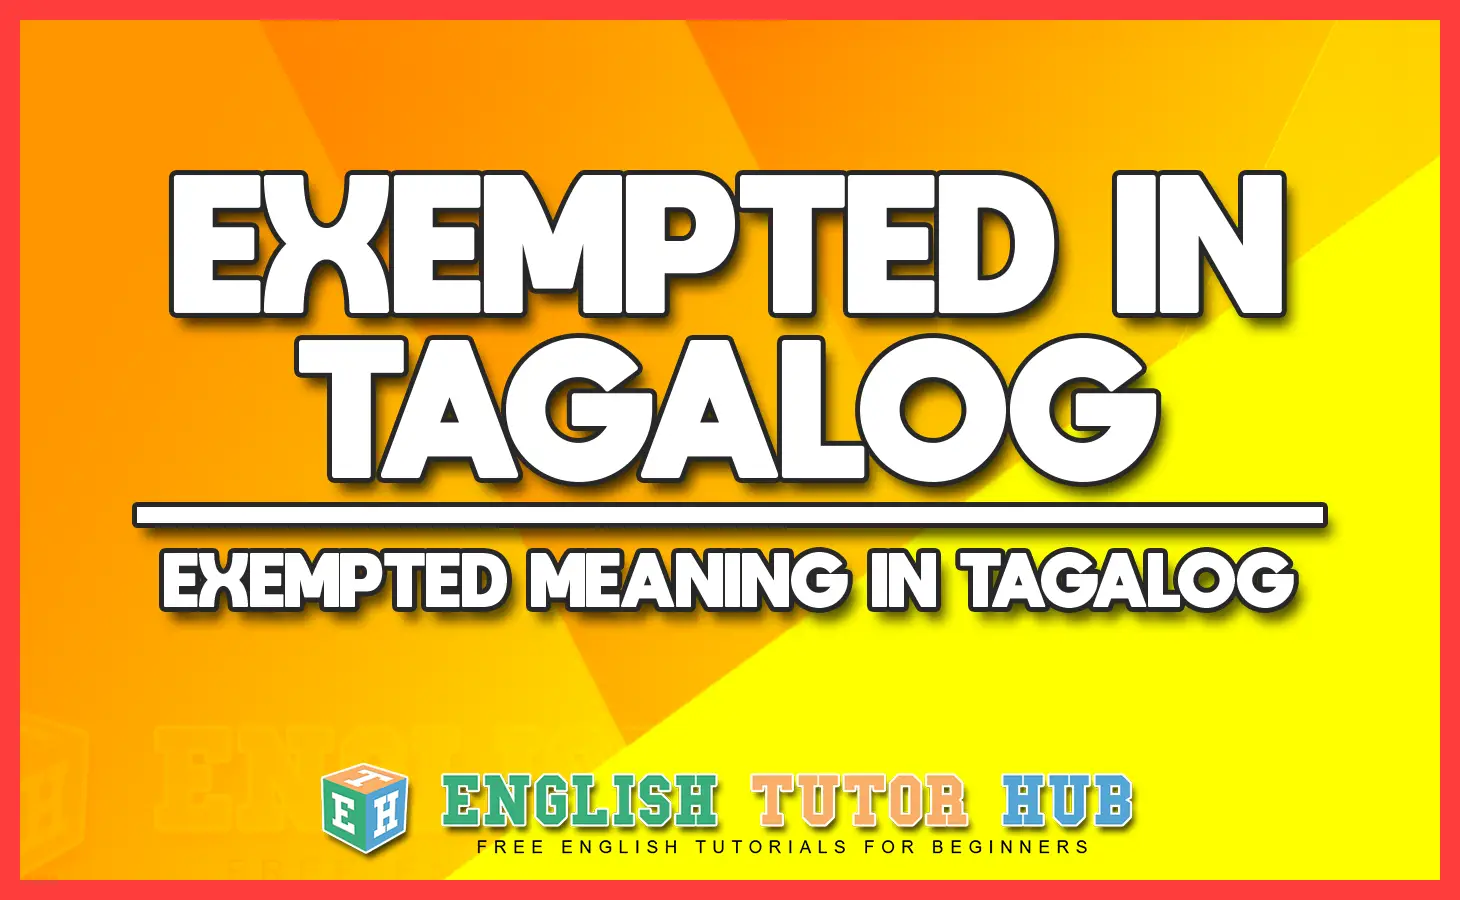 Exempted in Tagalog - Exempted Meaning in Tagalog